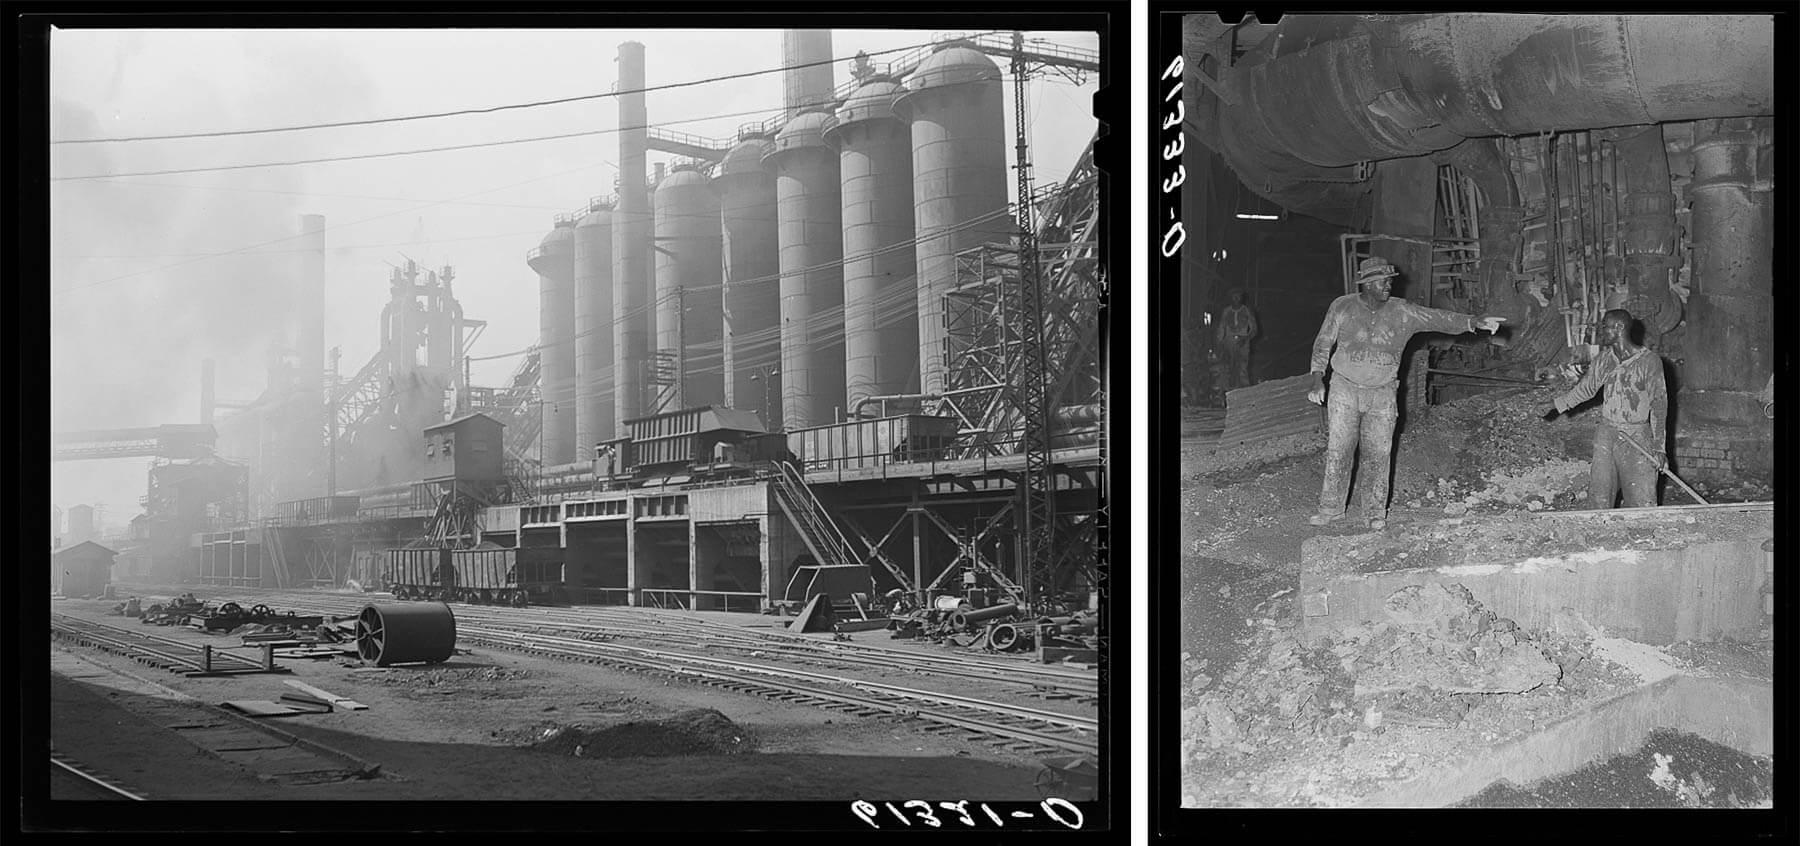 Turner Station: Heart and Soul - For over 80 years, Bethlehem Steel operated the Sparrows...